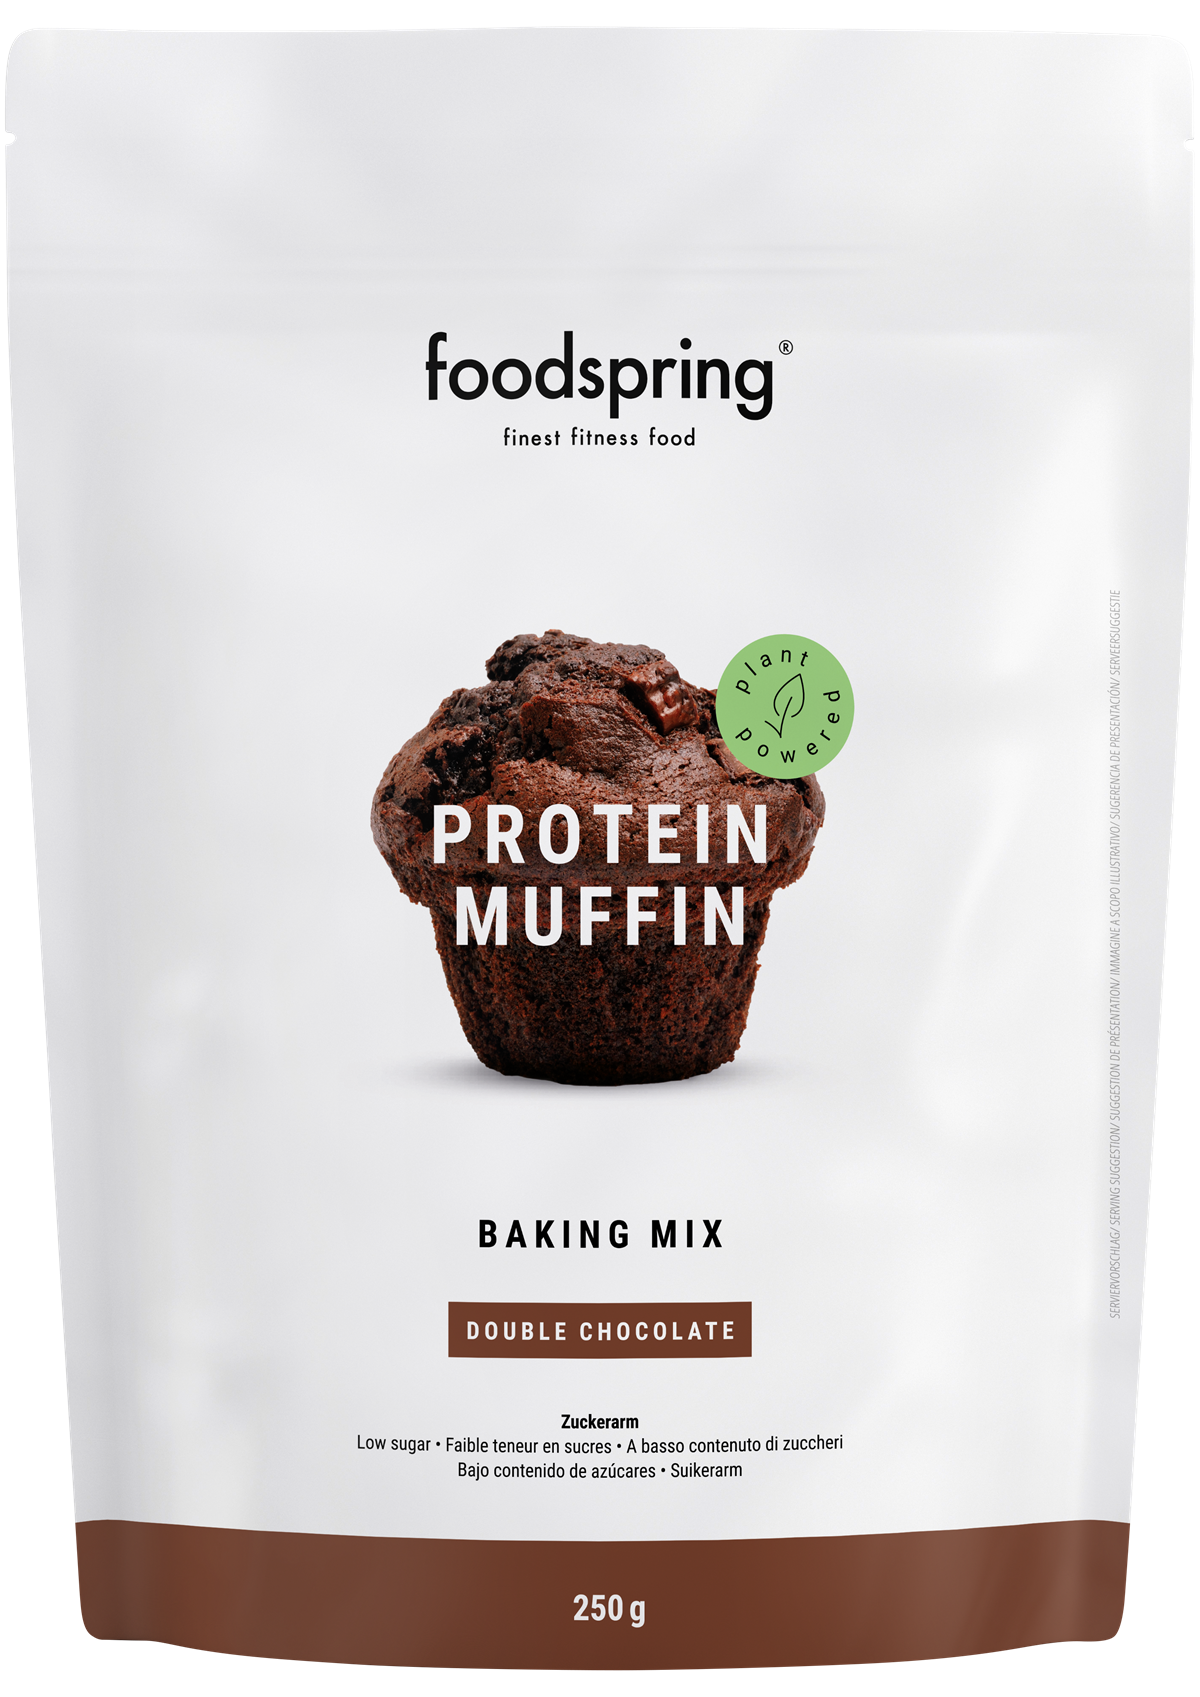 foodspring_Protein Muffin_Double Chocolate Geschmack_EUR 7,99